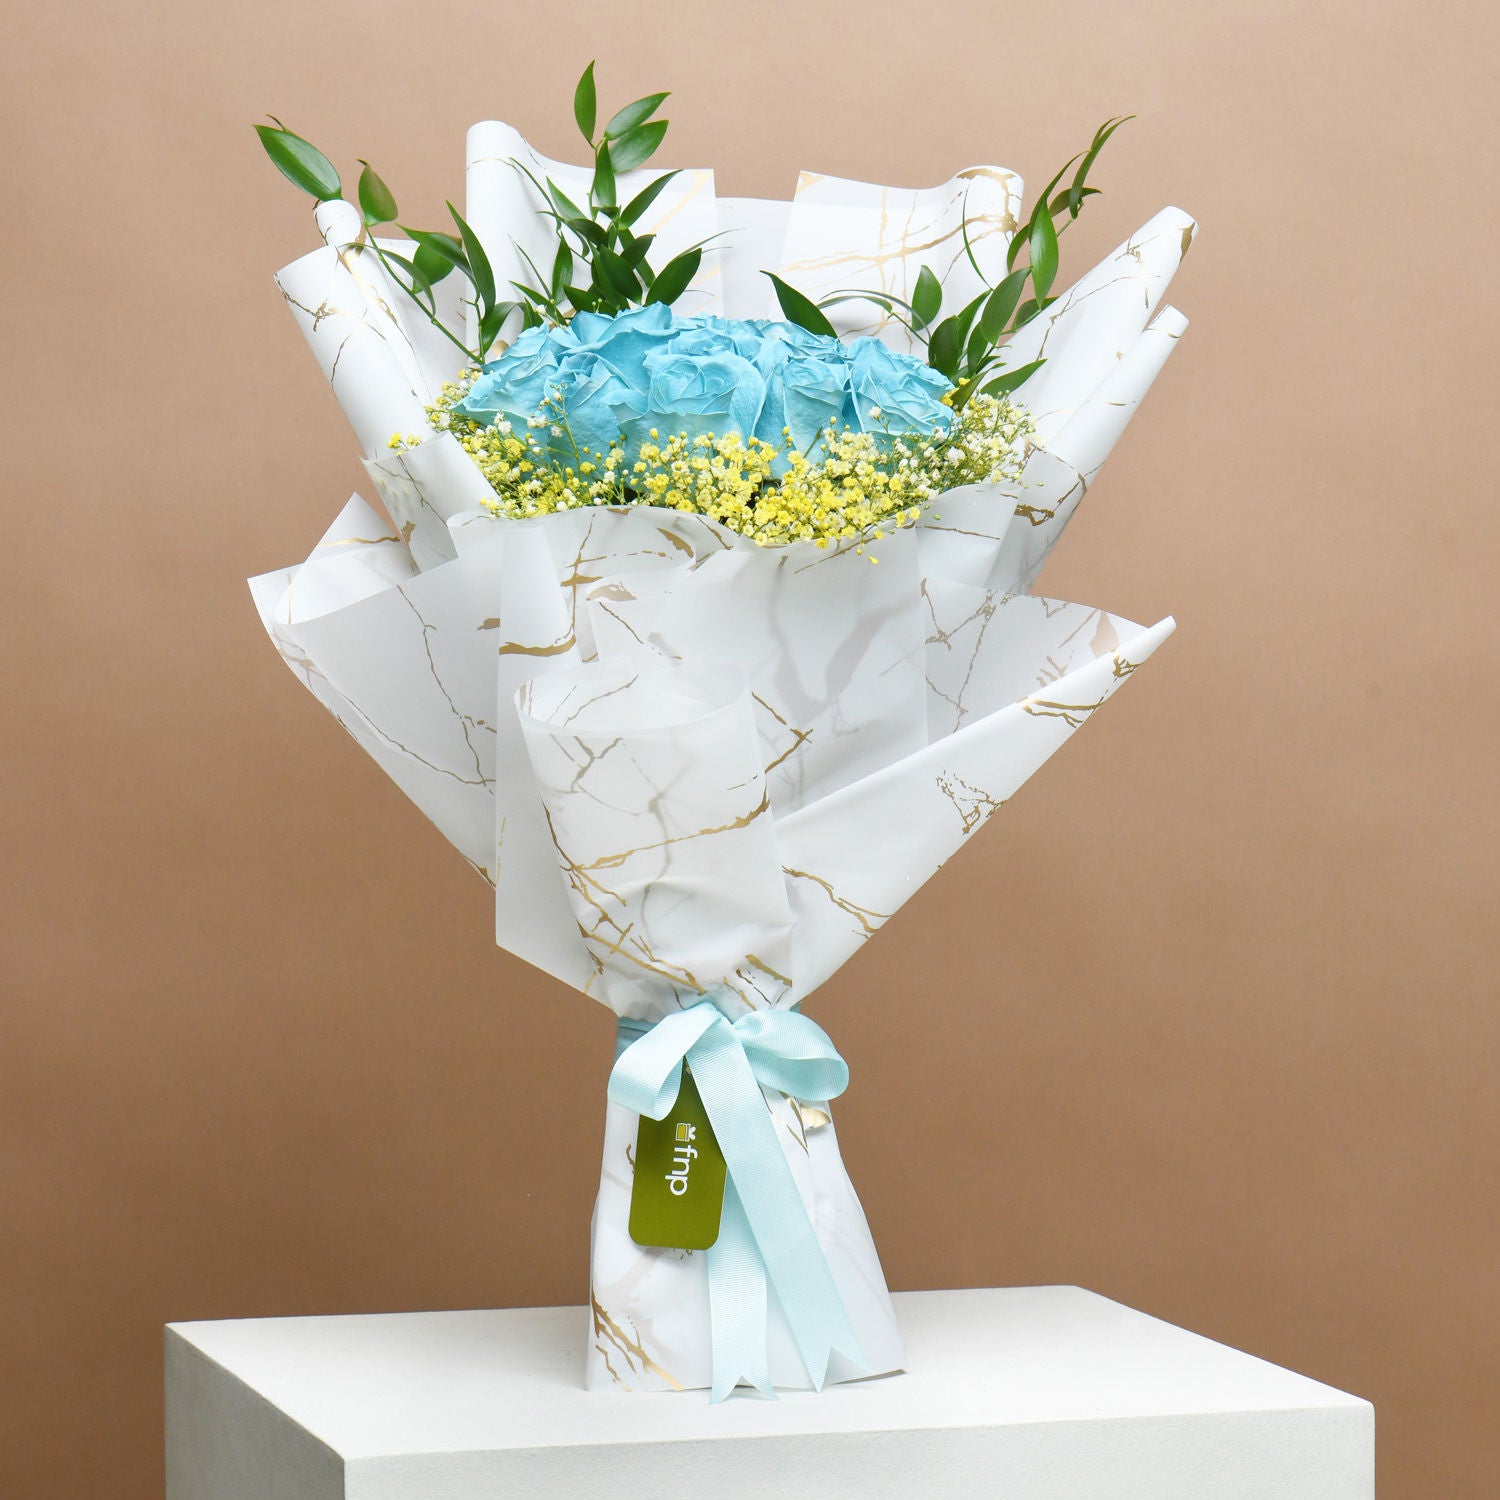 White Roses in a Blue Sea with Cake Surprise